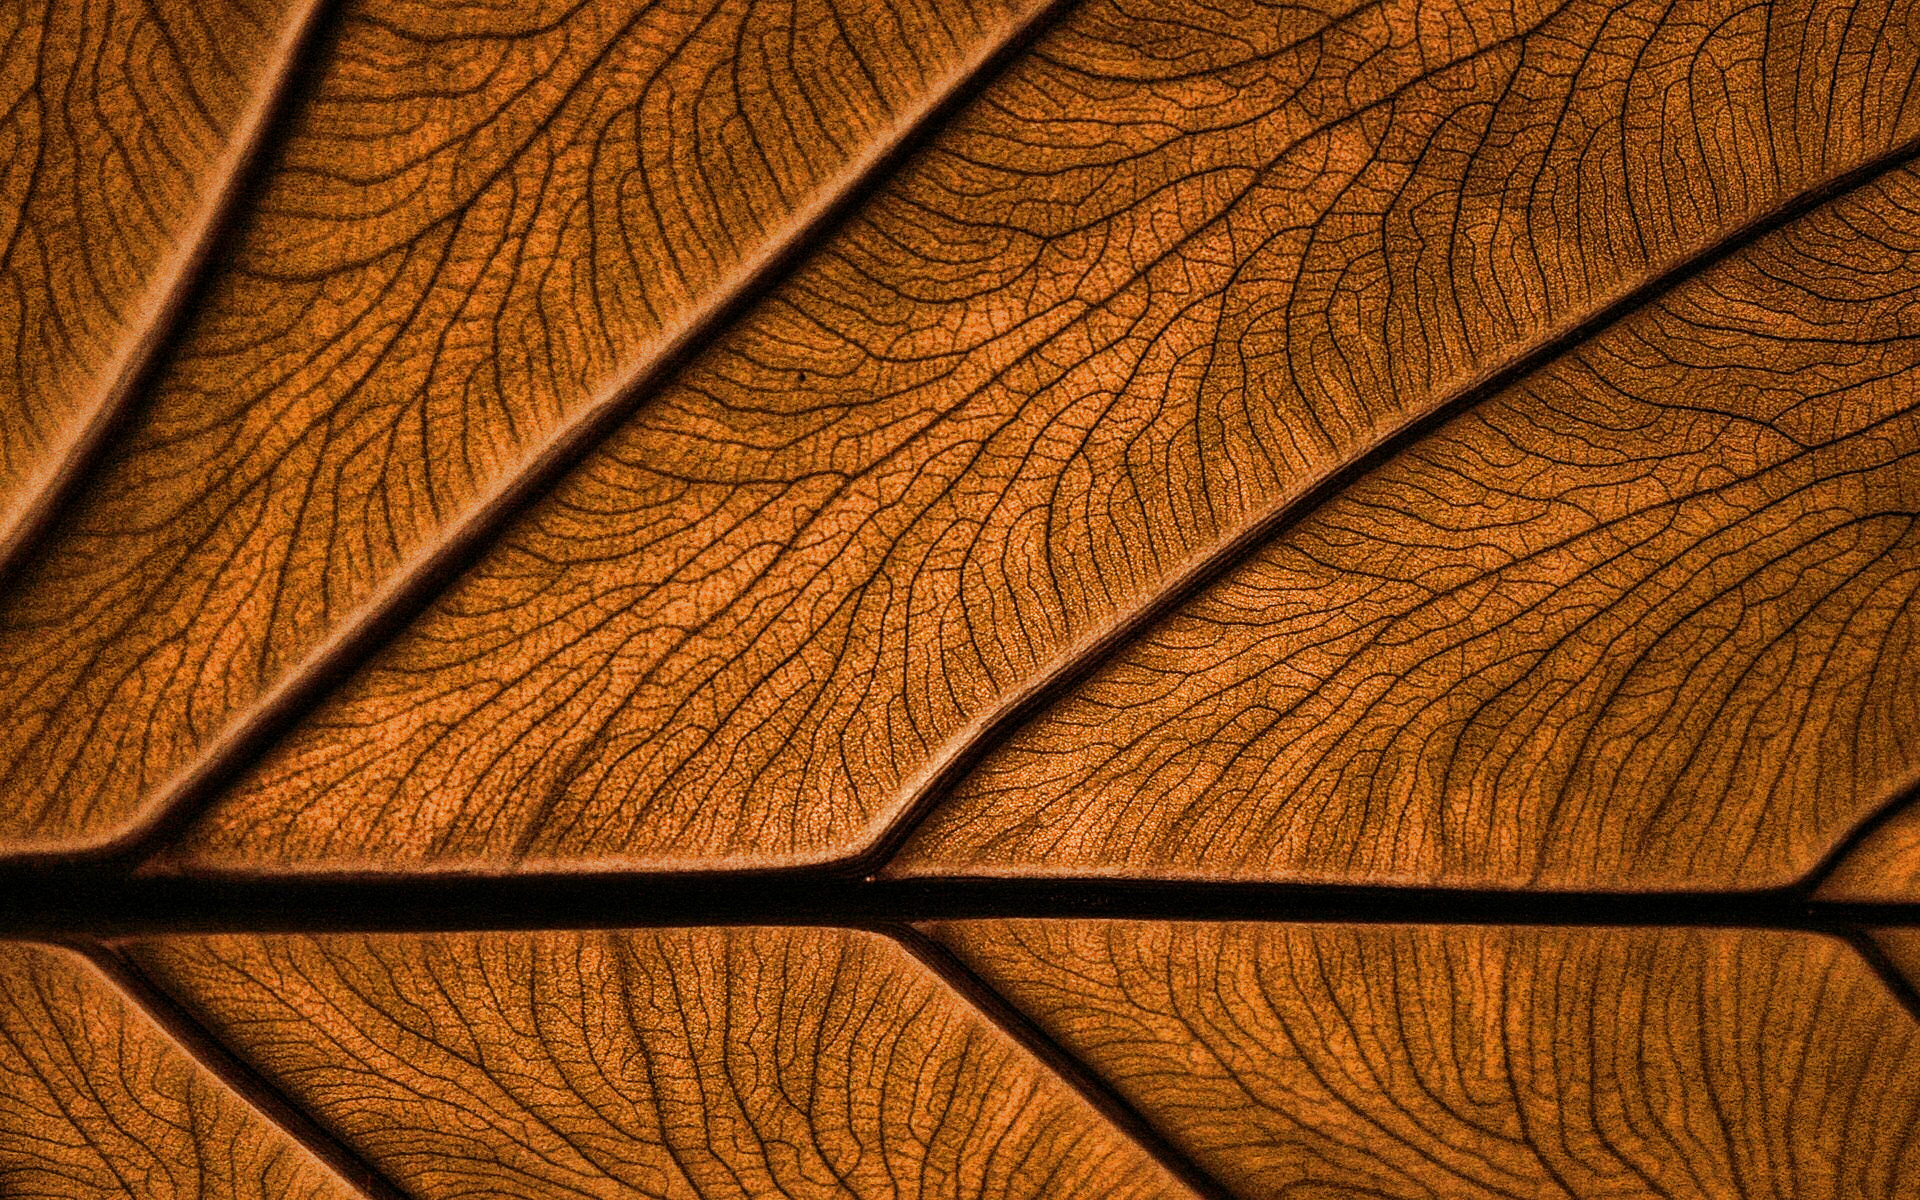 Download wallpaper brown leaves texture, 4k, plant textures, leaves, brown background, leaves texture, brown leaves, brown leaf, macro, leaf pattern, leaf textures for desktop with resolution 1920x1200. High Quality HD picture wallpaper